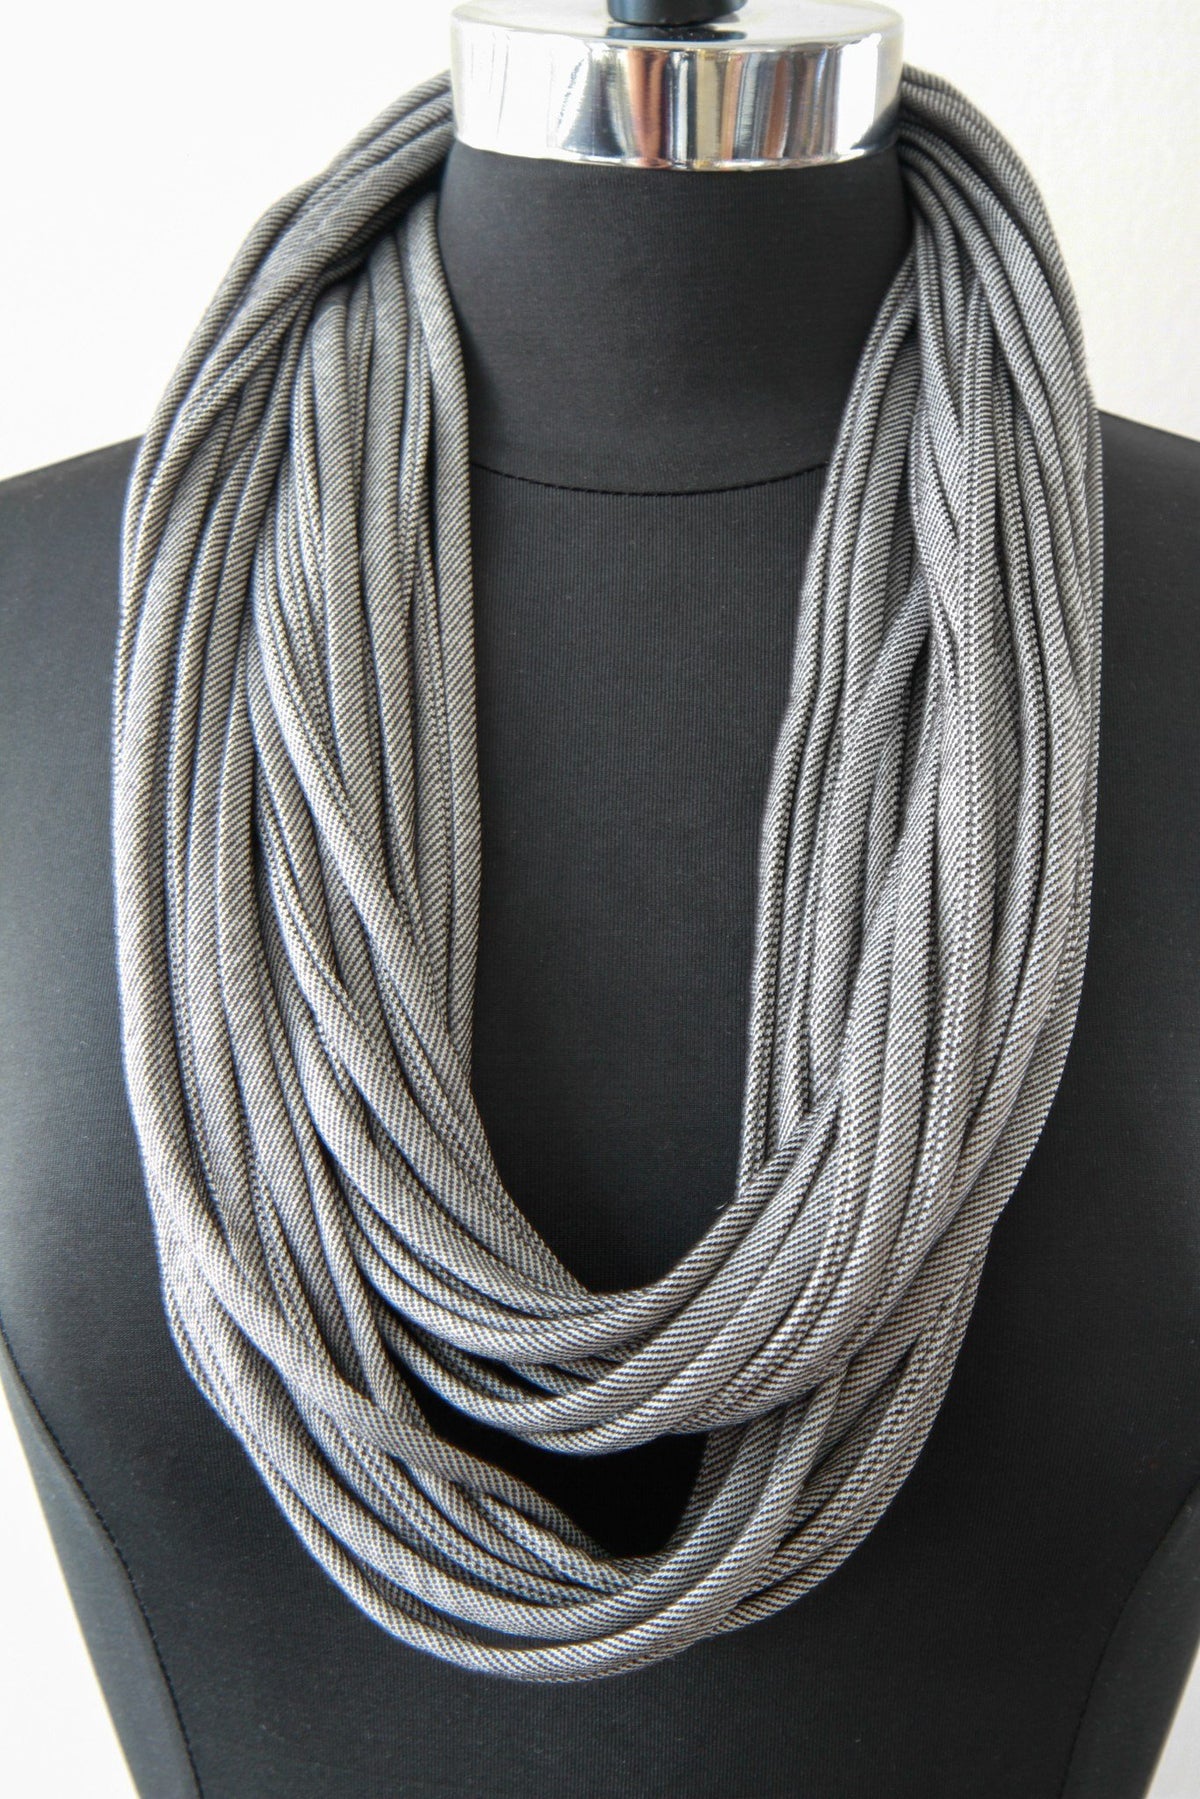 Gray Fabric Infinity Scarf or Necklace for Men or Women